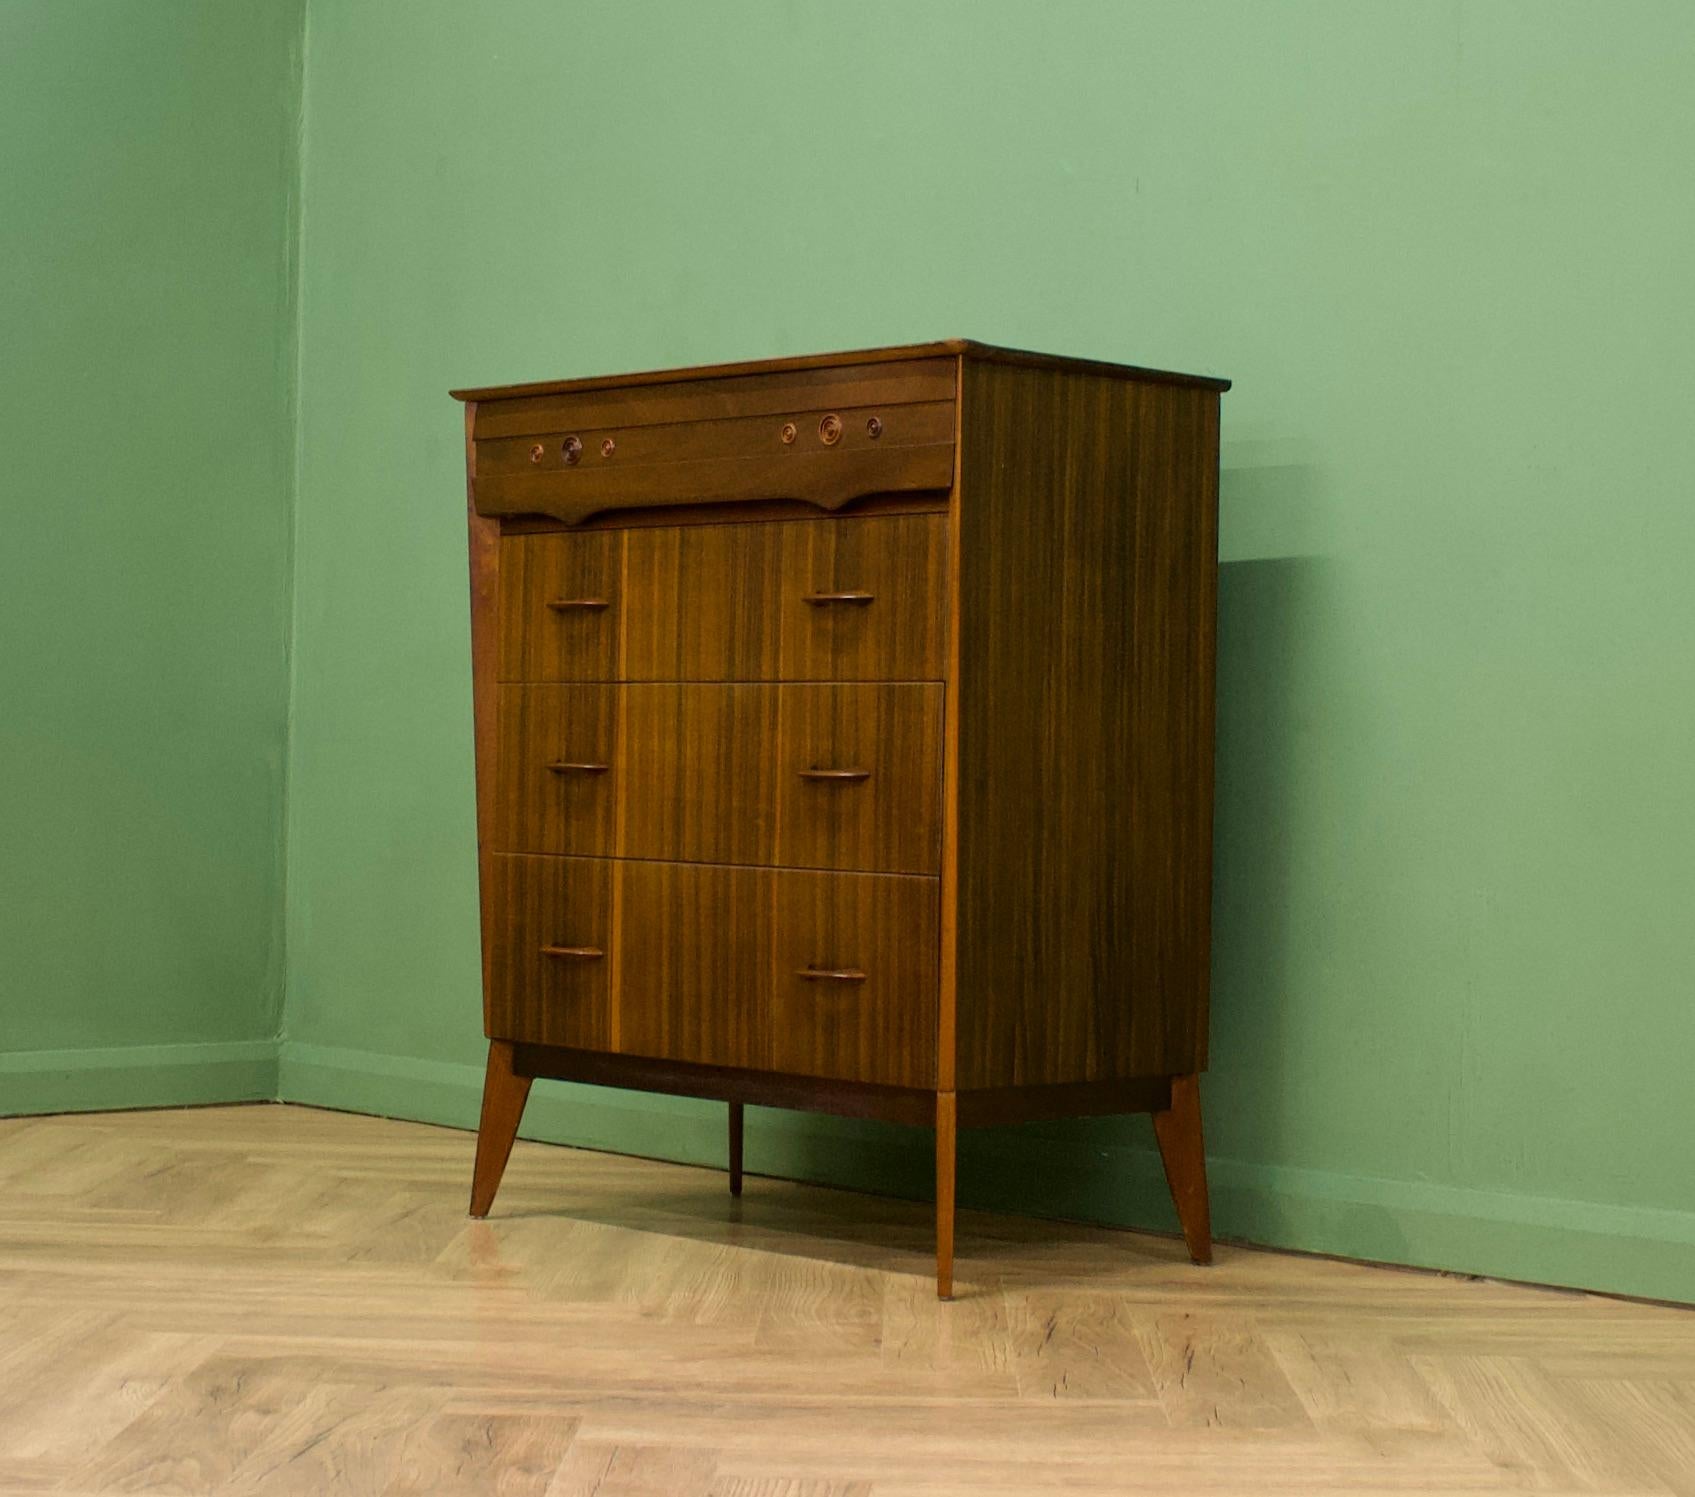 British Mid-Century Chest of Drawers in Walnut from Waring and Gillow, 1950s For Sale